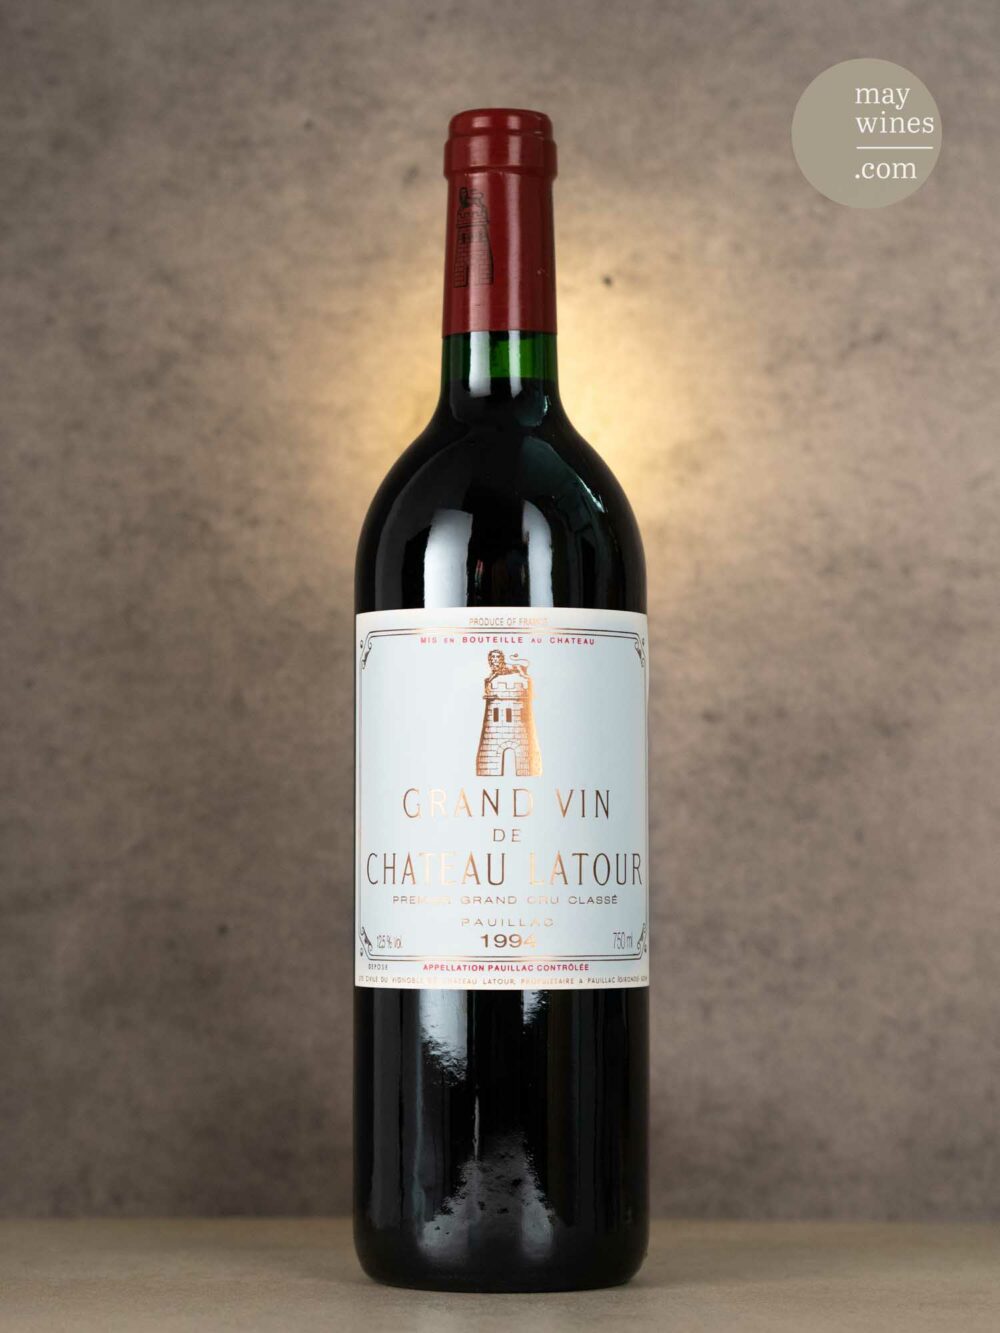 May Wines – Rotwein – 1994 Château Latour